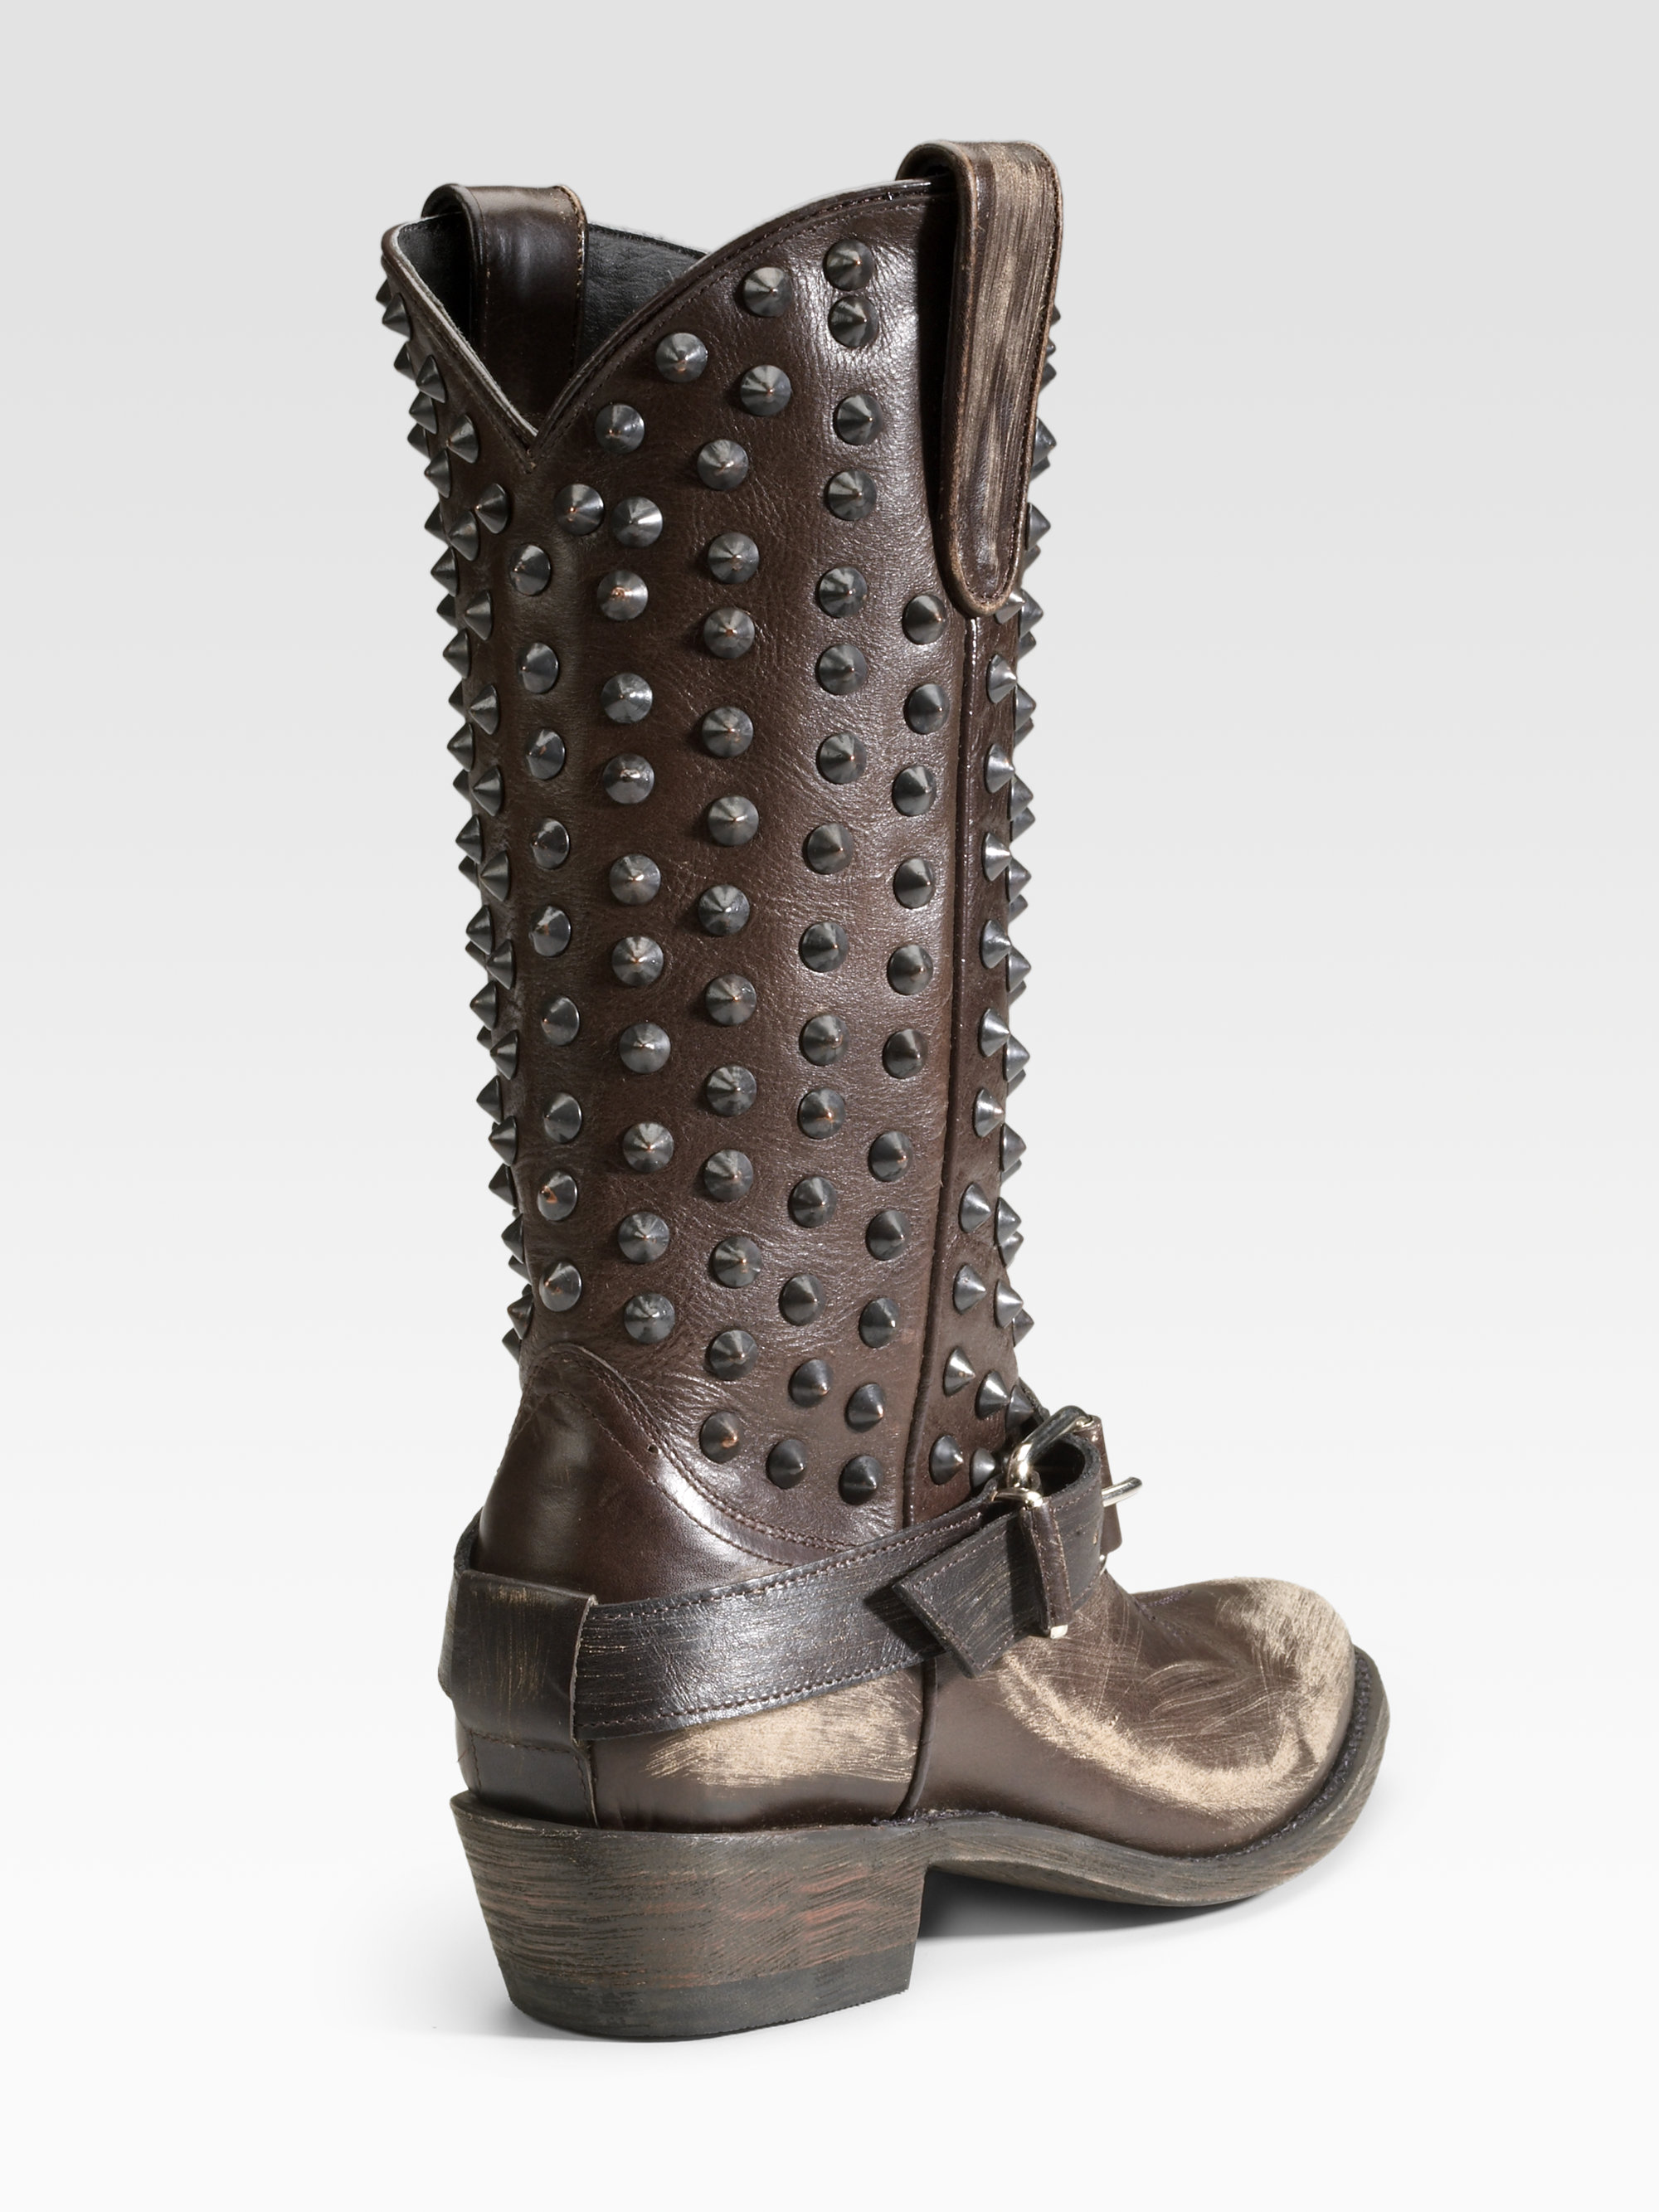 Lyst - Ash Studded Cowboy Boots in Brown